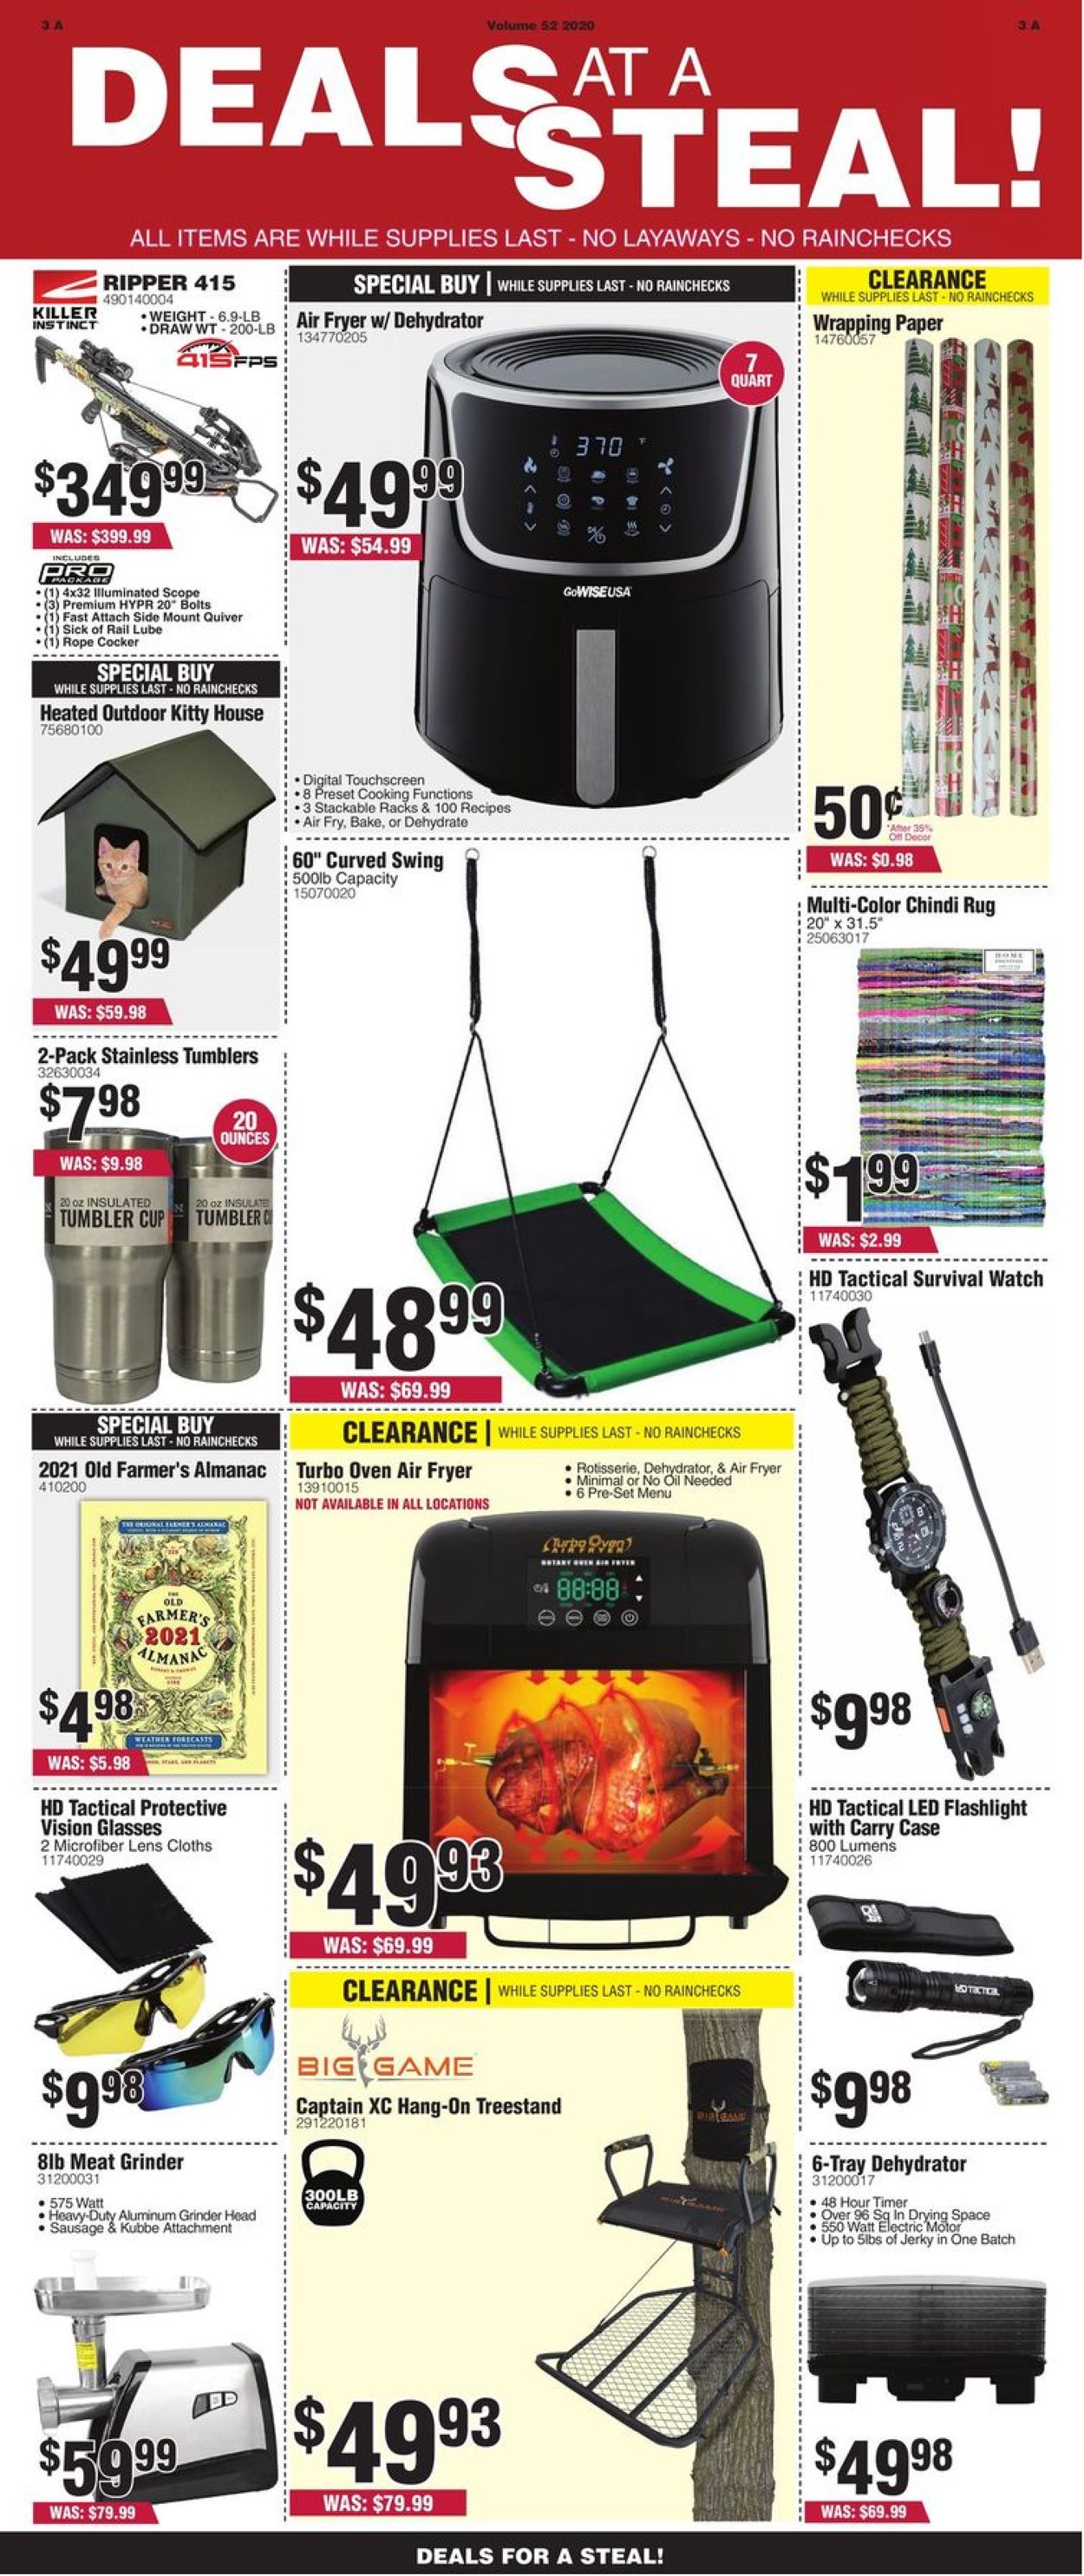 Catalogue Rural King Deals at a Steal from 12/17/2020